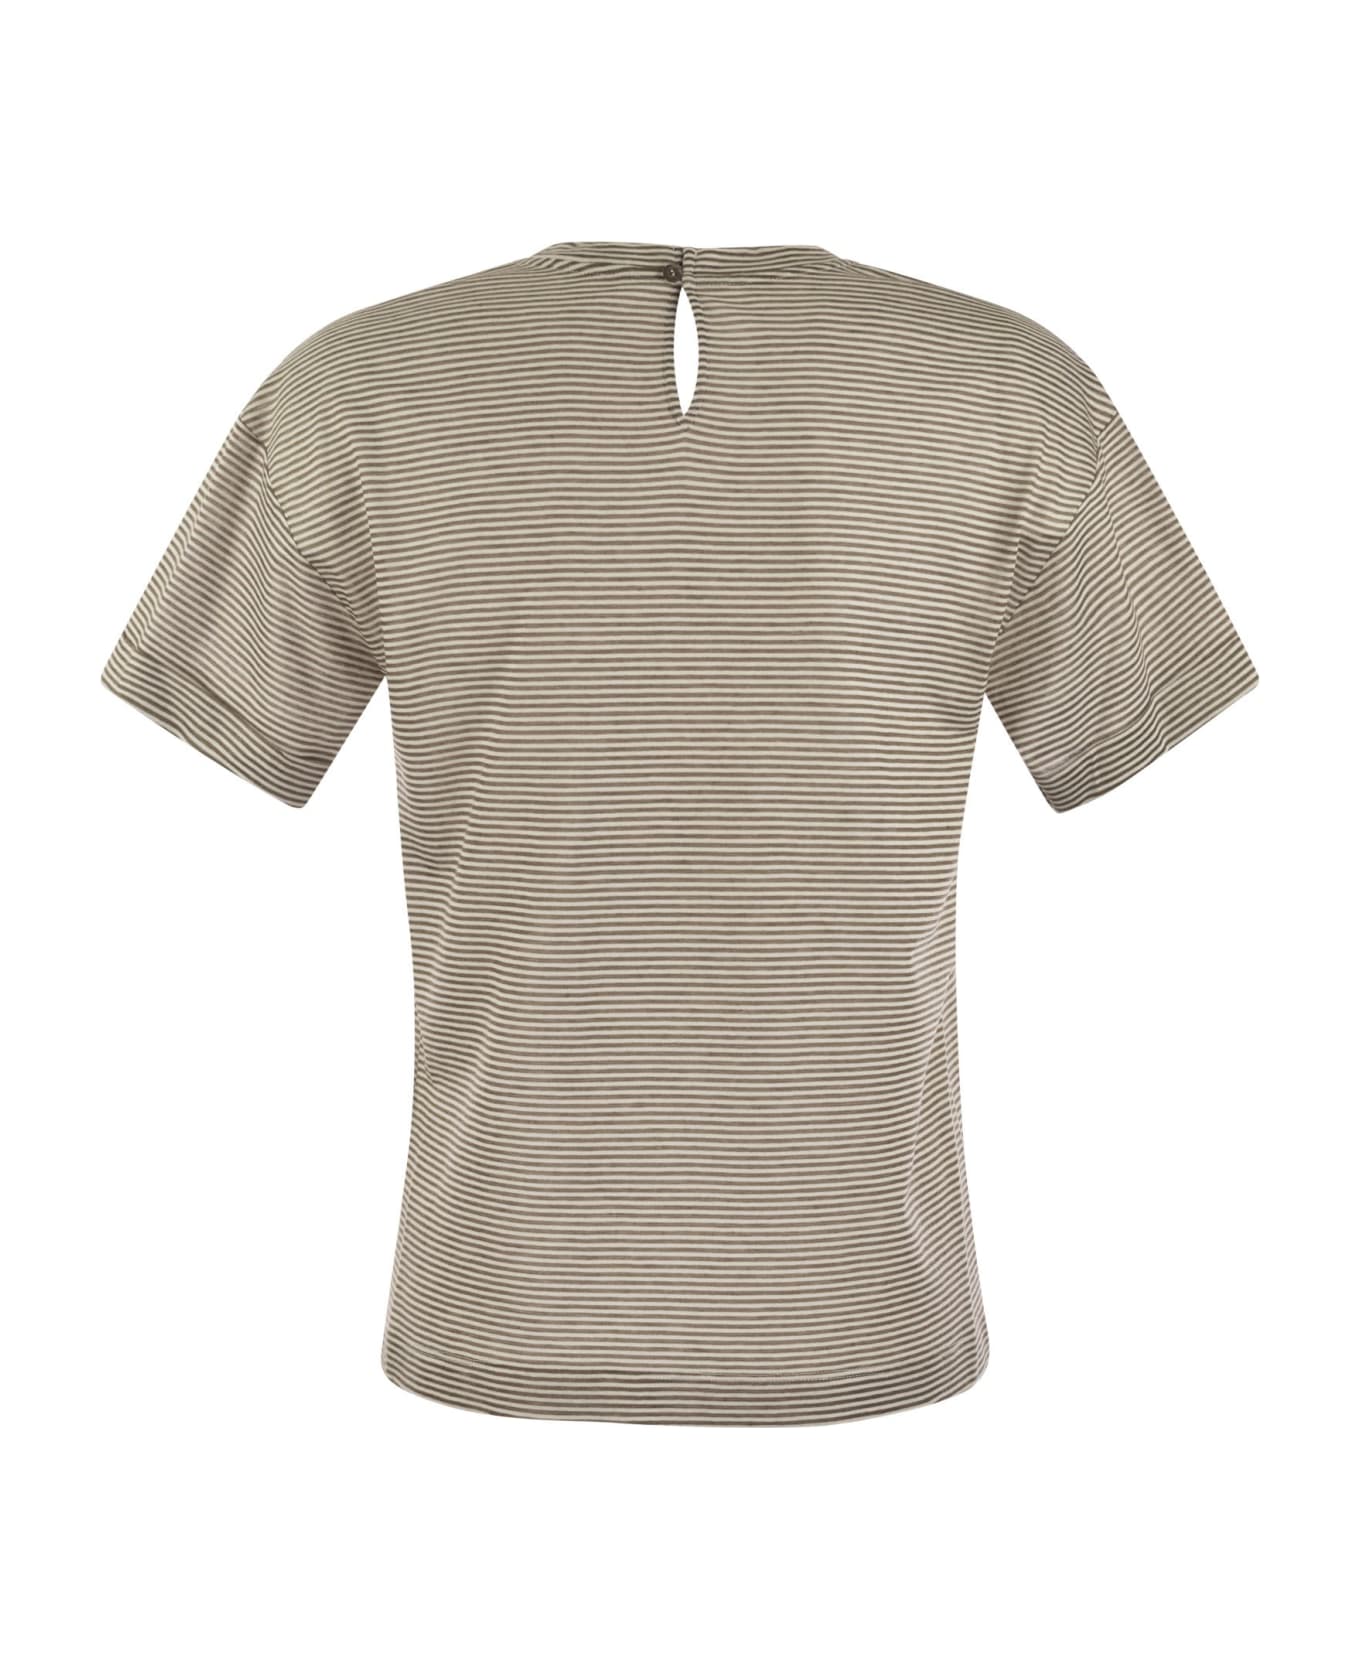 Peserico Lightweight Striped Jersey T-shirt And Punto Luce - White/brown